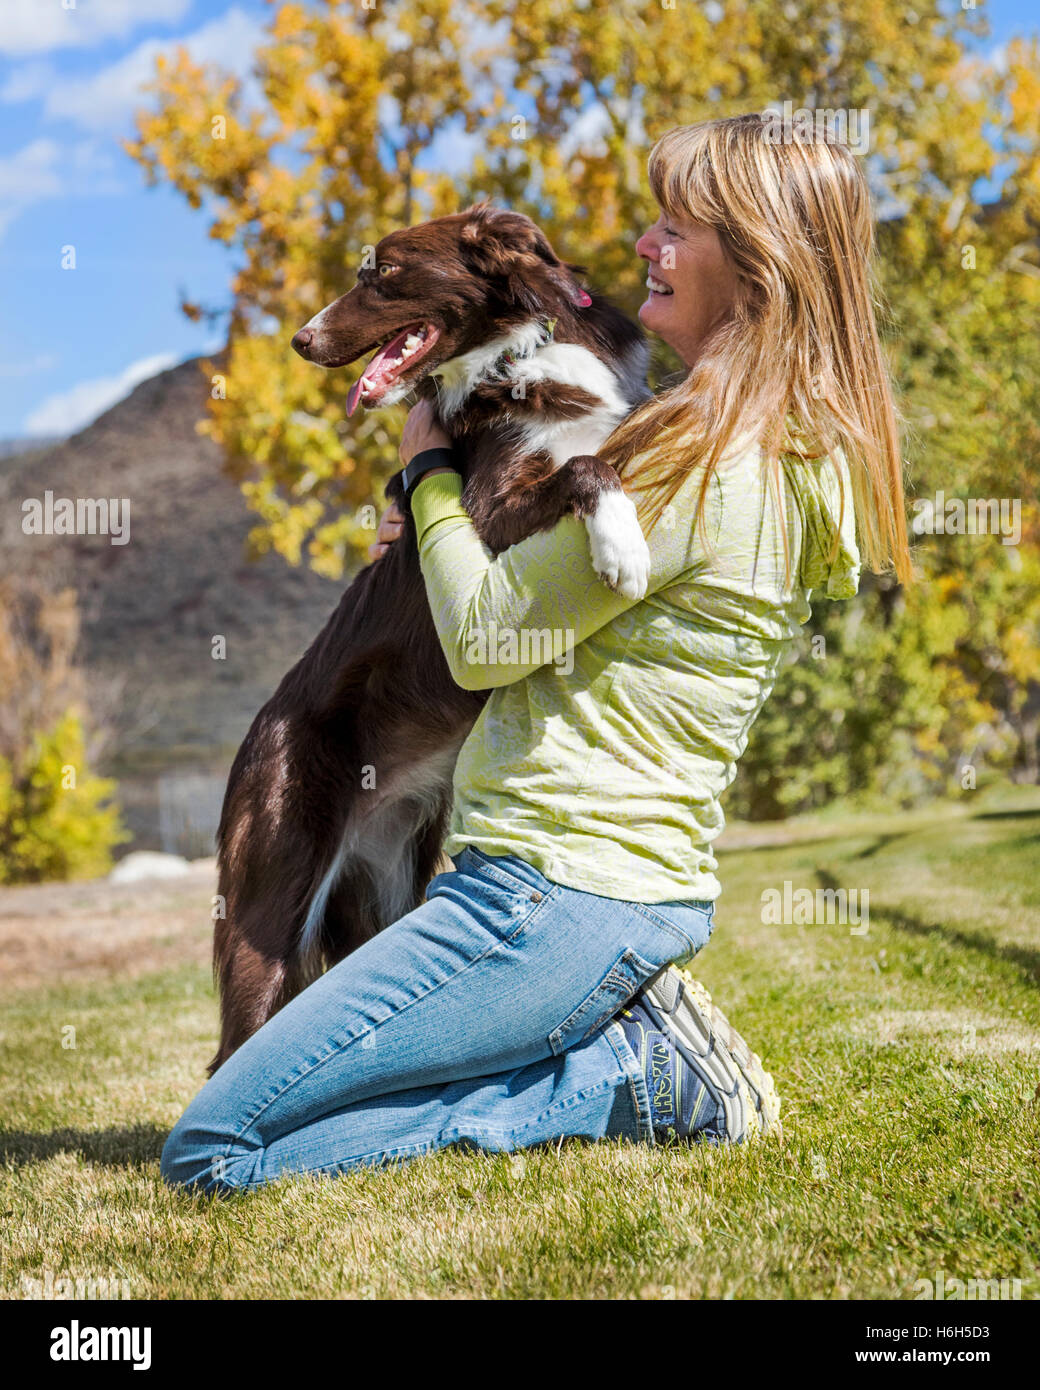 Attractive woman playing with her border collie dog on a grassy field Stock Photo